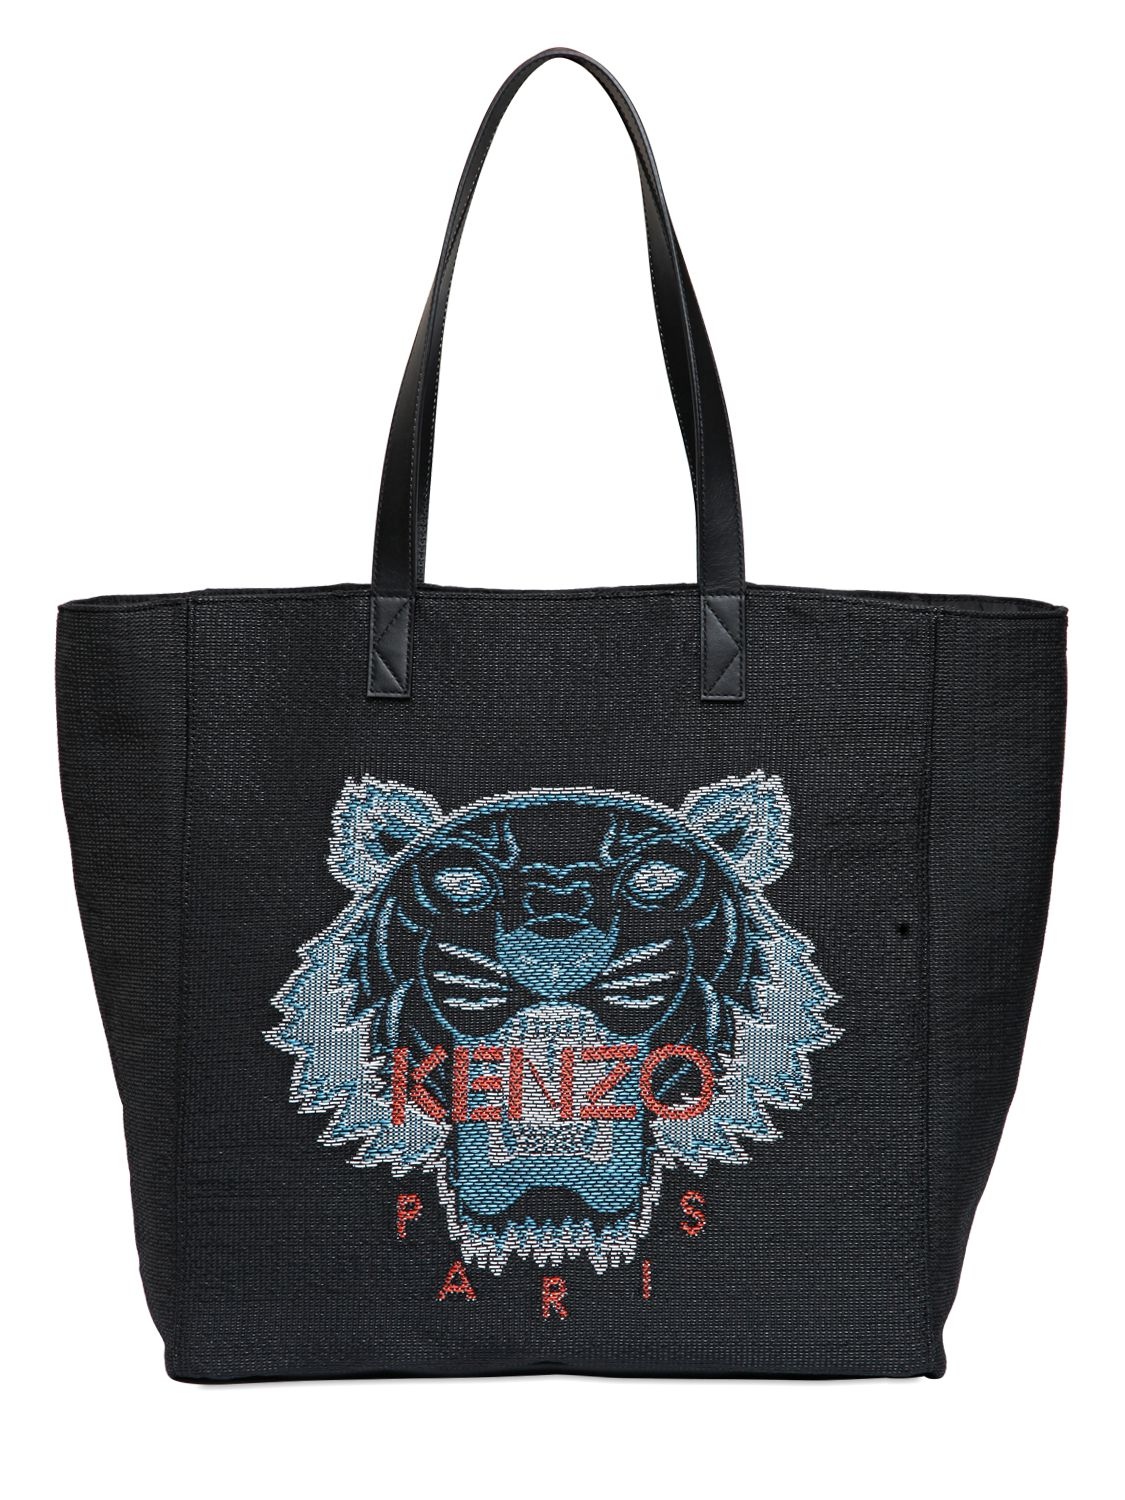 KENZO Tiger Woven Straw & Leather Tote Bag in Black - Lyst